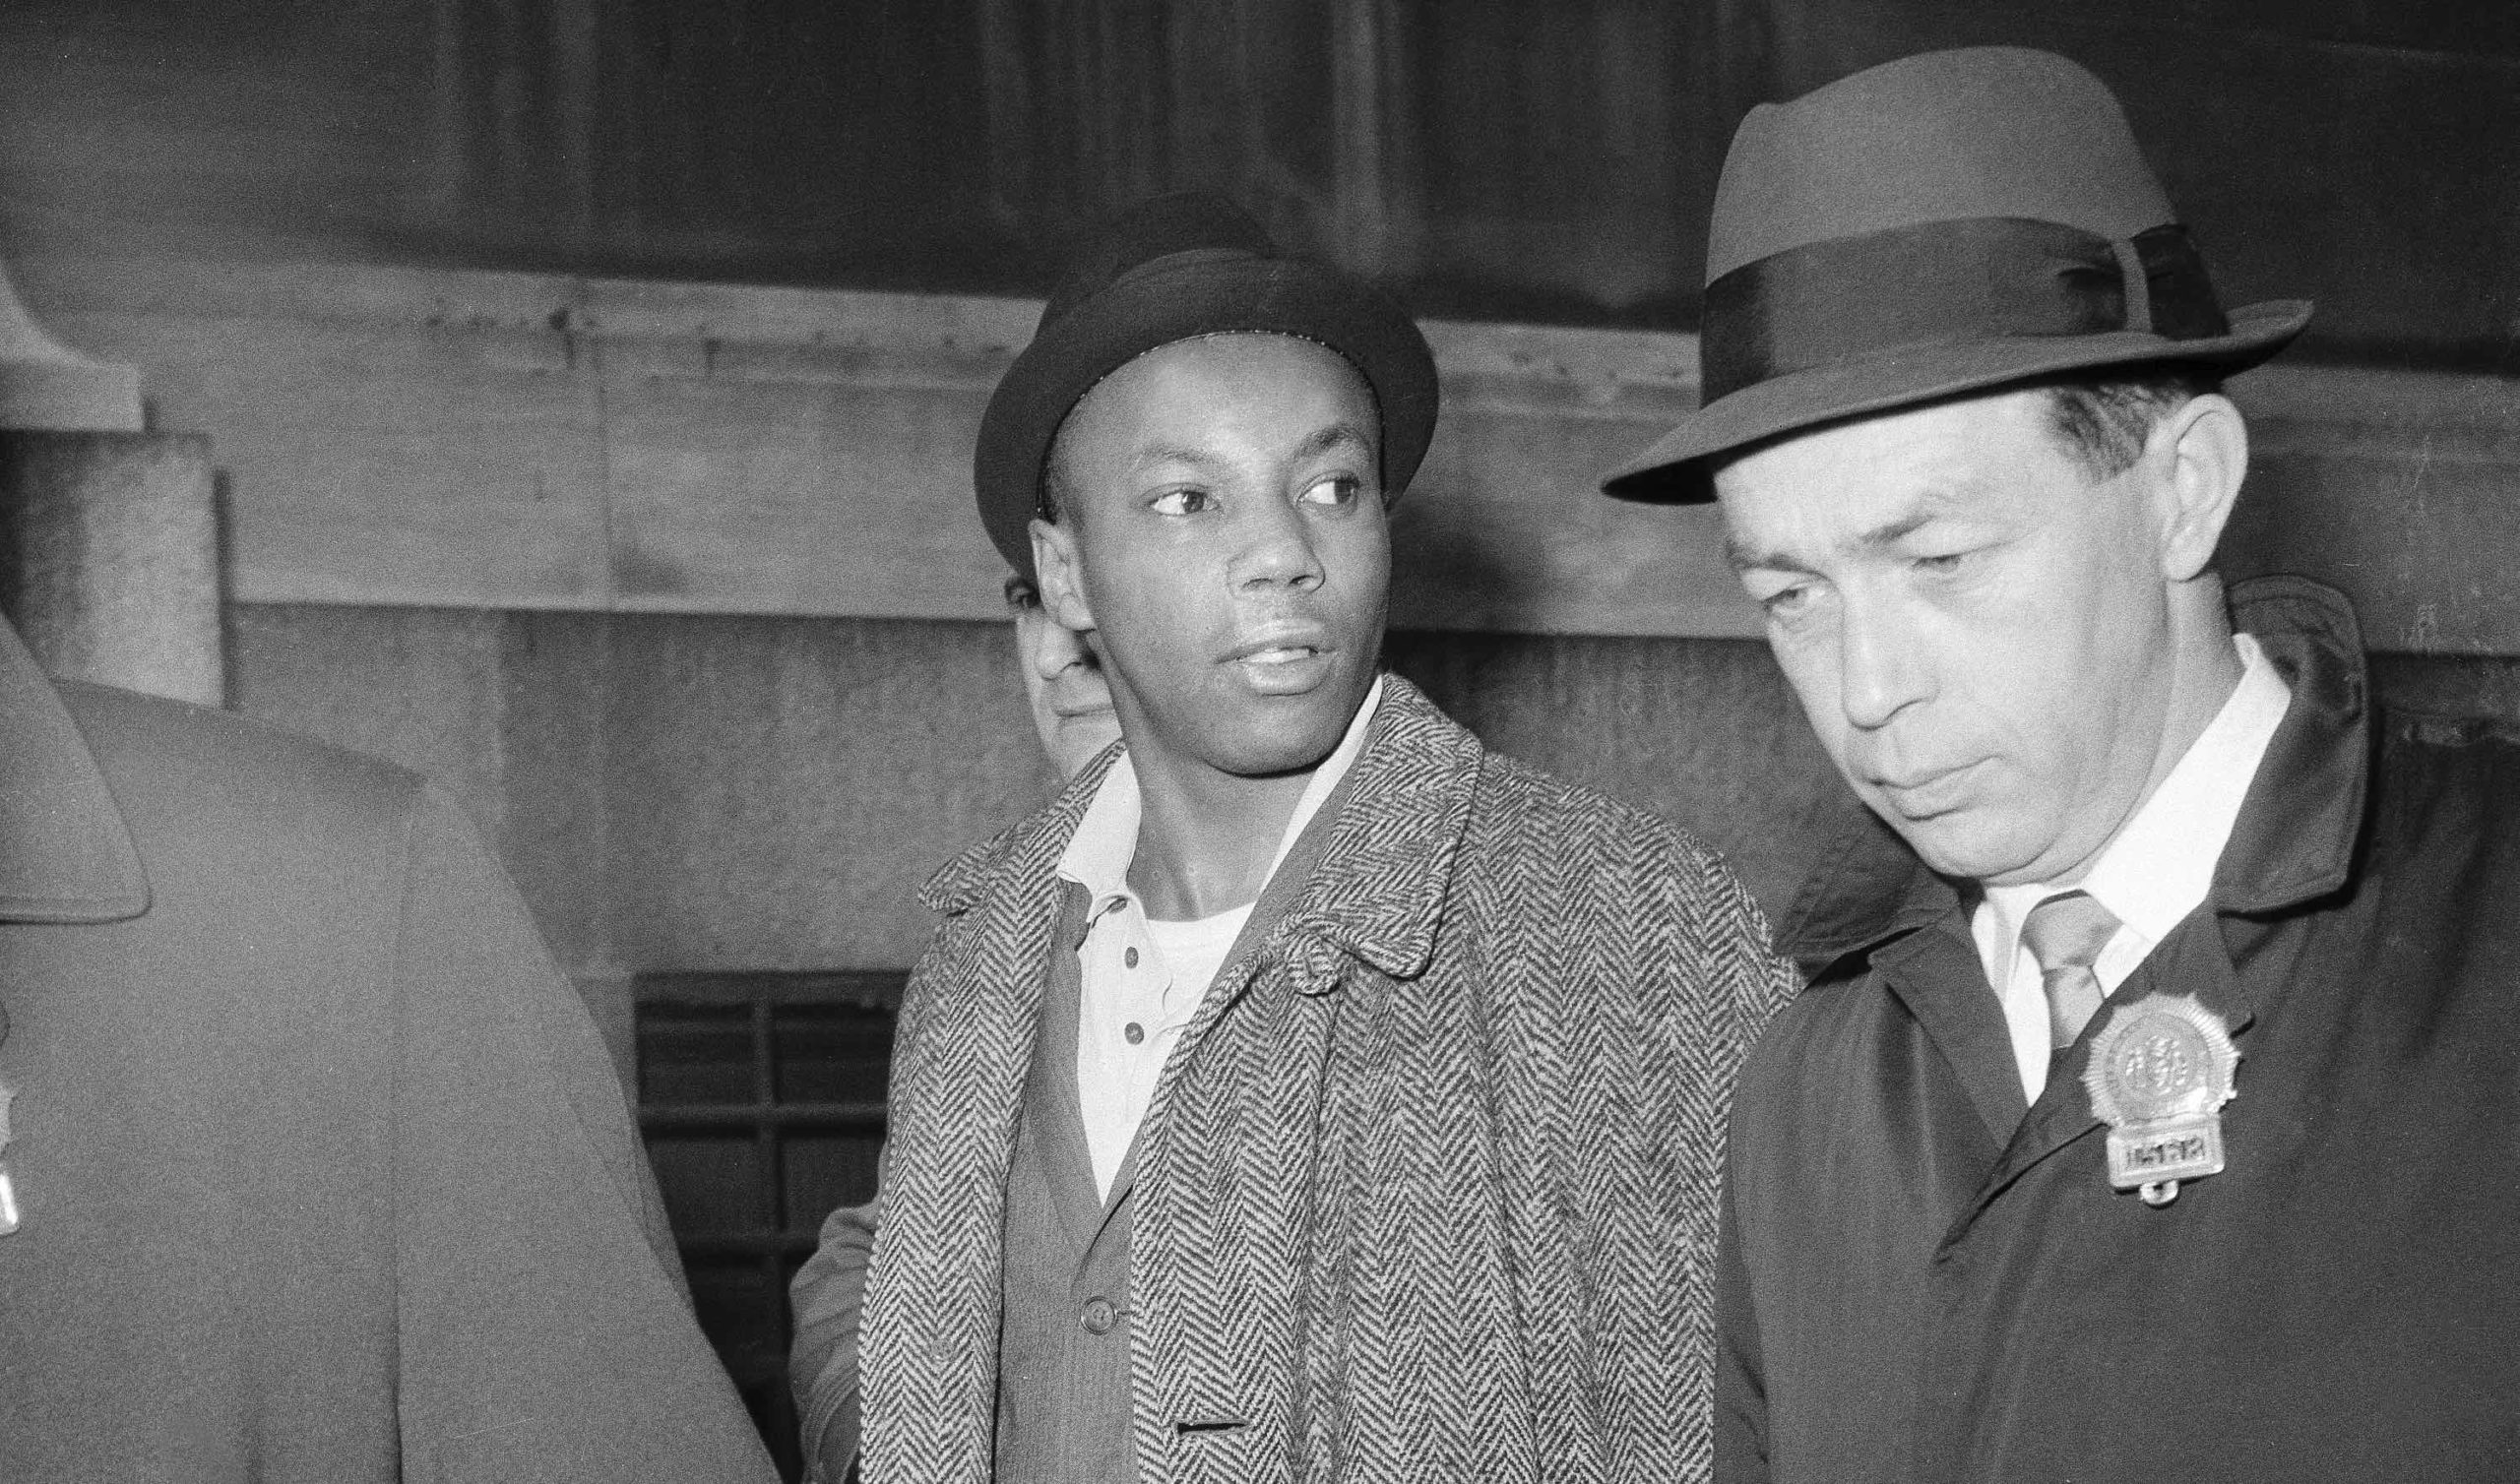 Norman 3X Butler is escorted by detectives at police headquarters at 240 Centre Street after his arrest as a suspect in the assassination of Malcolm X, in New York, Feb. 26, 1965. Butler, who now goes by Muhammad Abdul Aziz, always maintained his innocence. (Image: Associated Press)